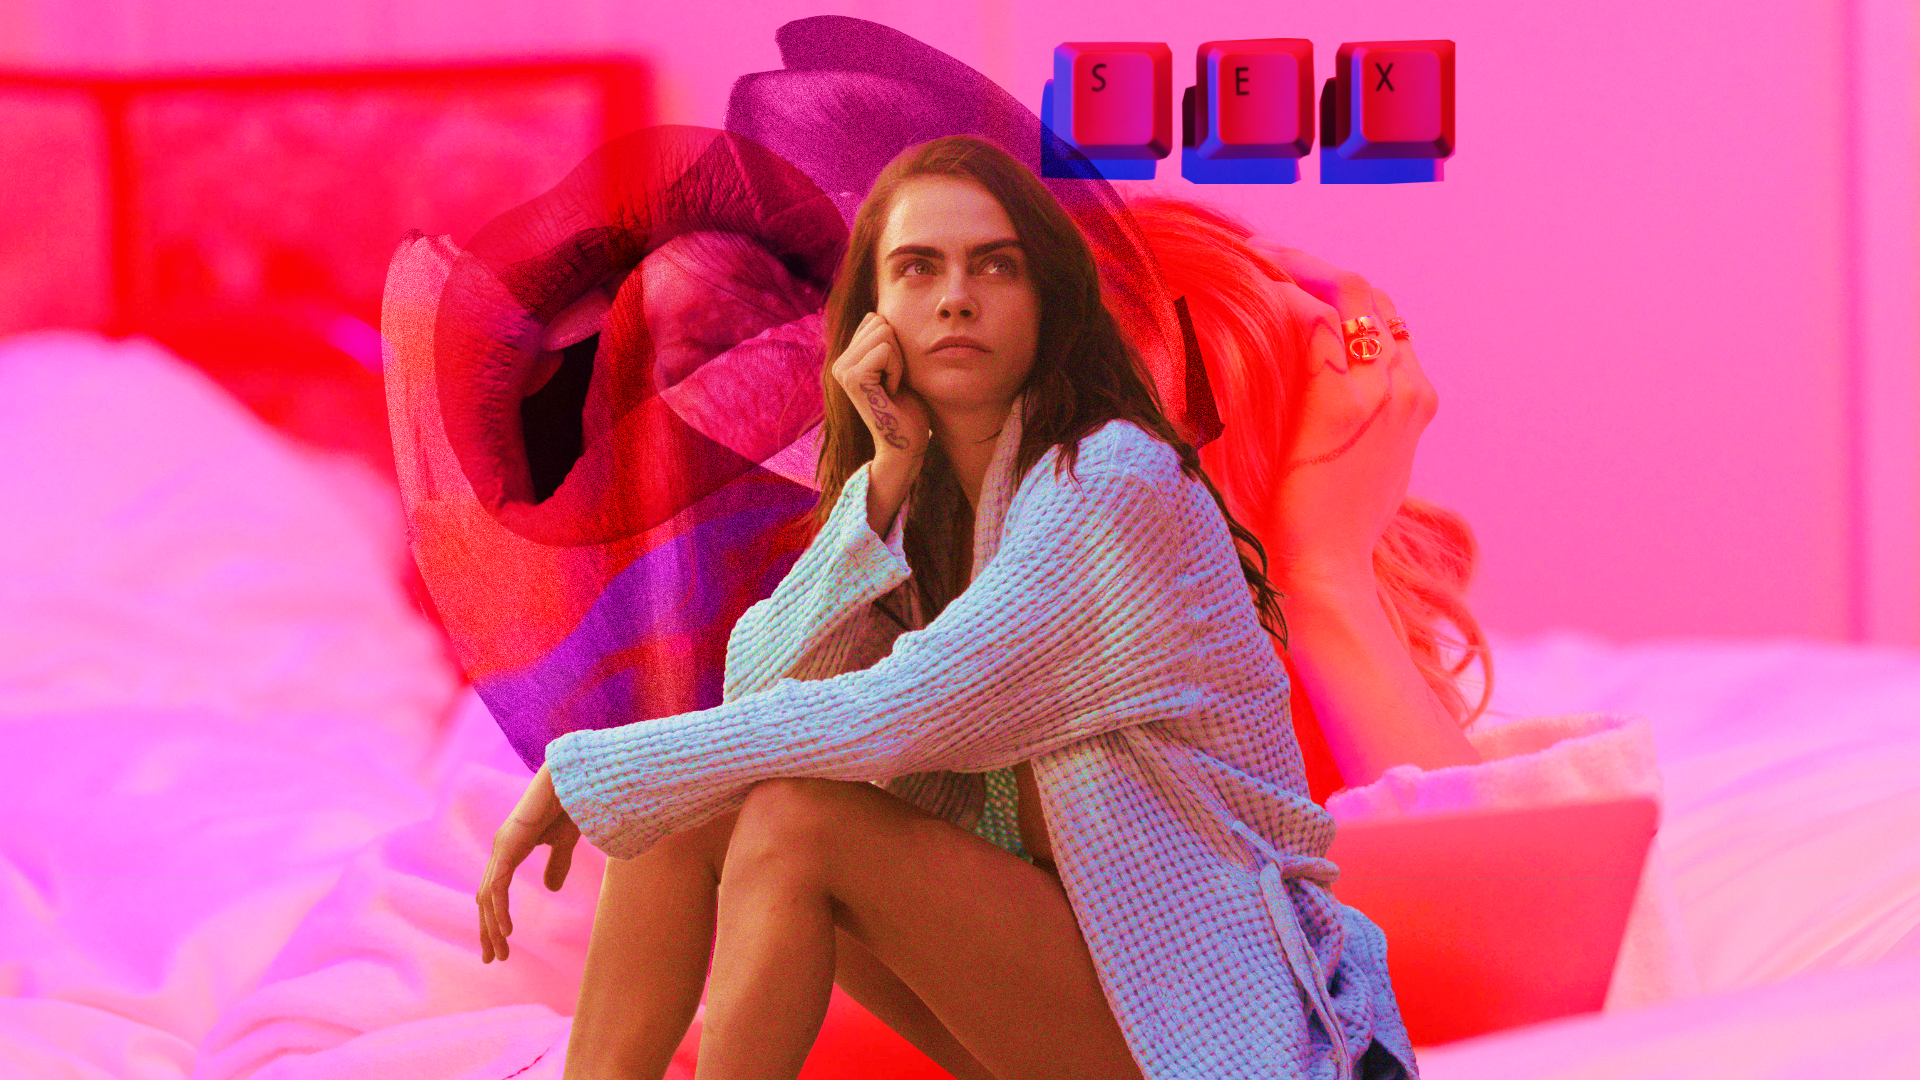 Planet Sex with Cara Delevingne image